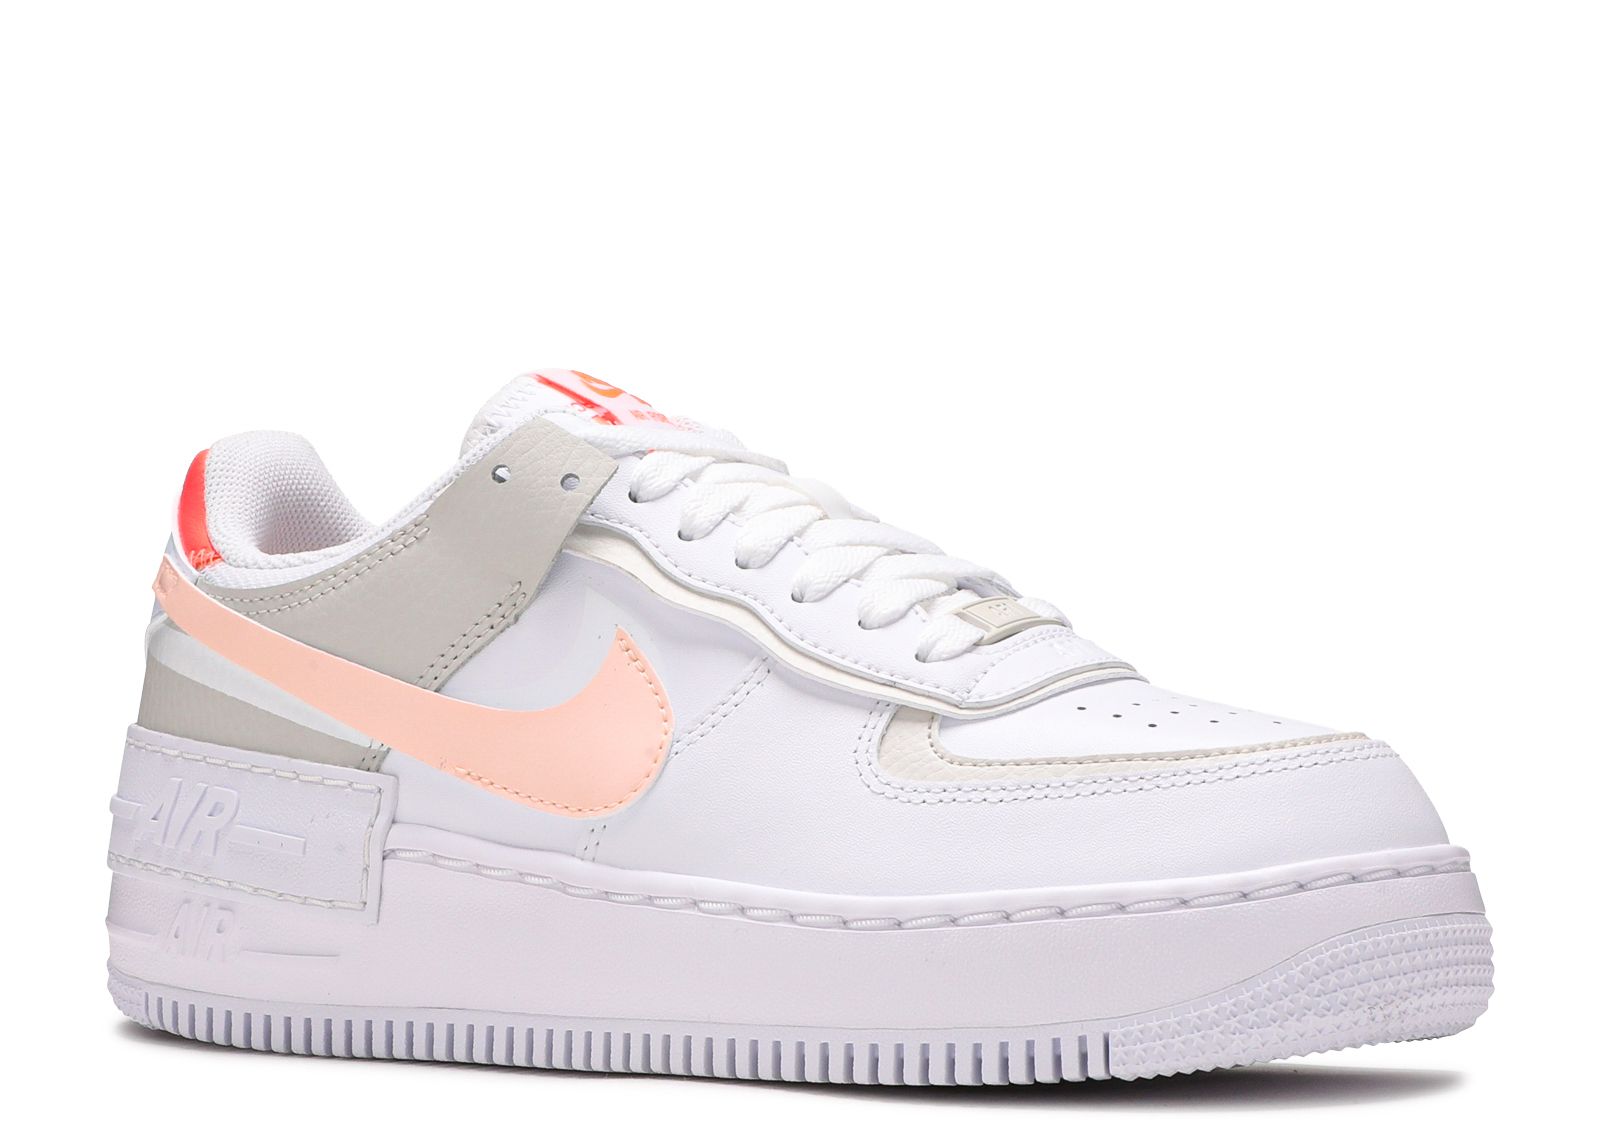 Wmns Air Force 1 Low Shadow 'White Bright Mango'